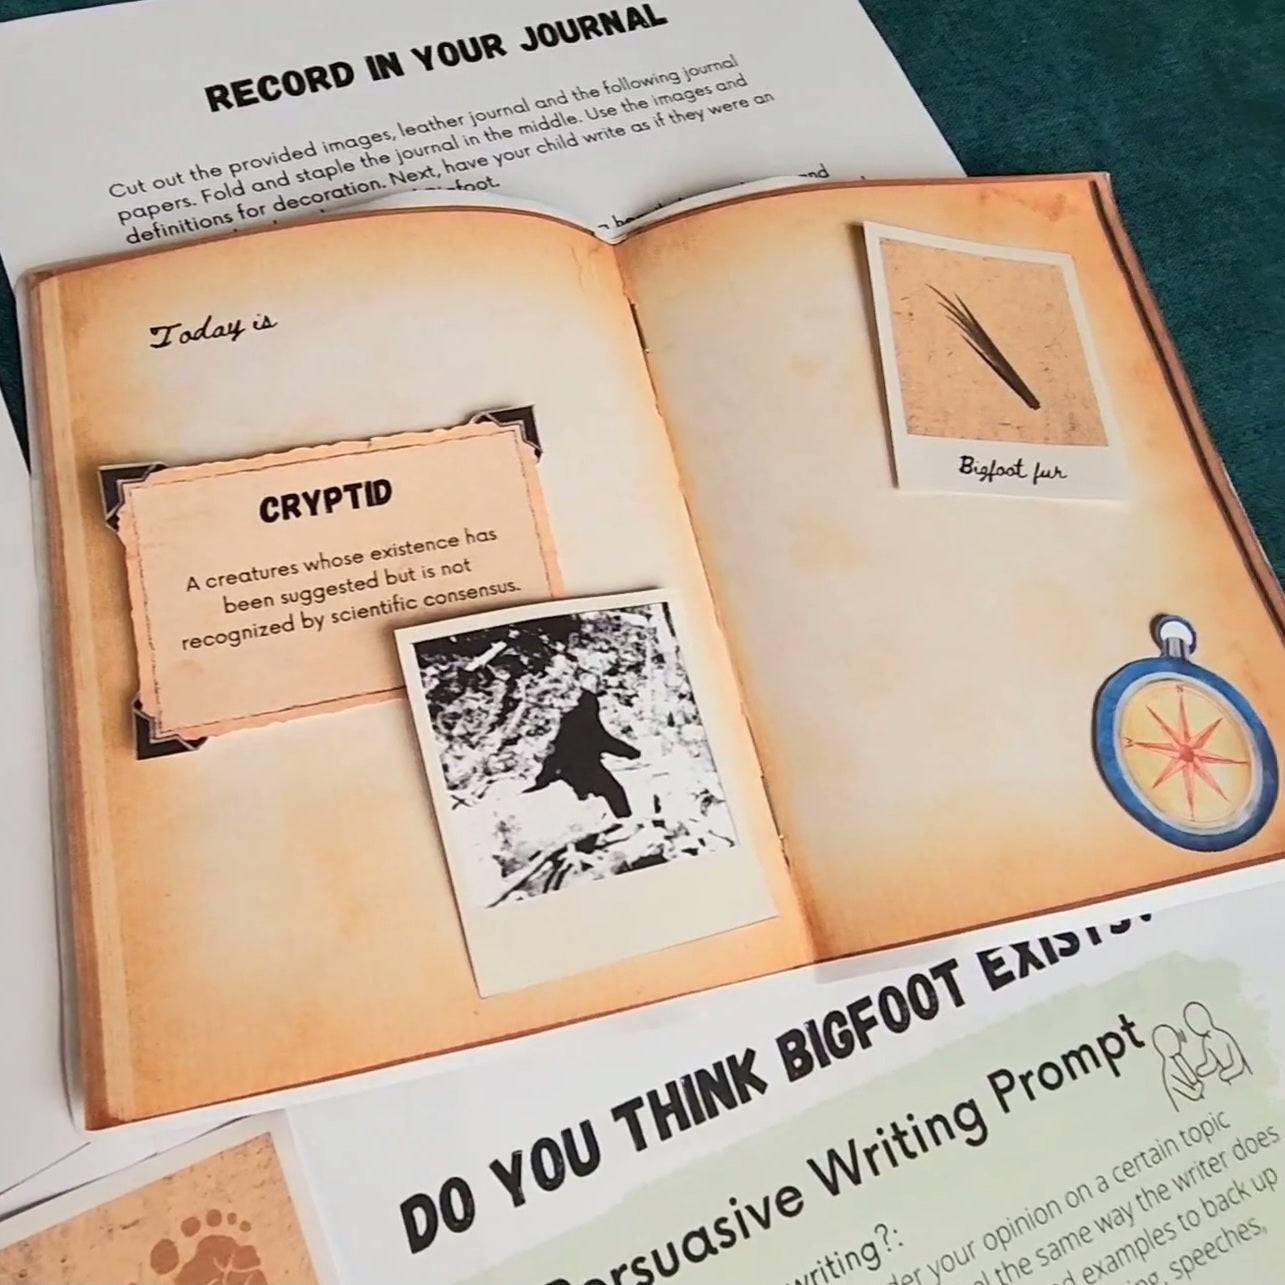 Bigfoot Unit Study Cryptids Write Create Play Research